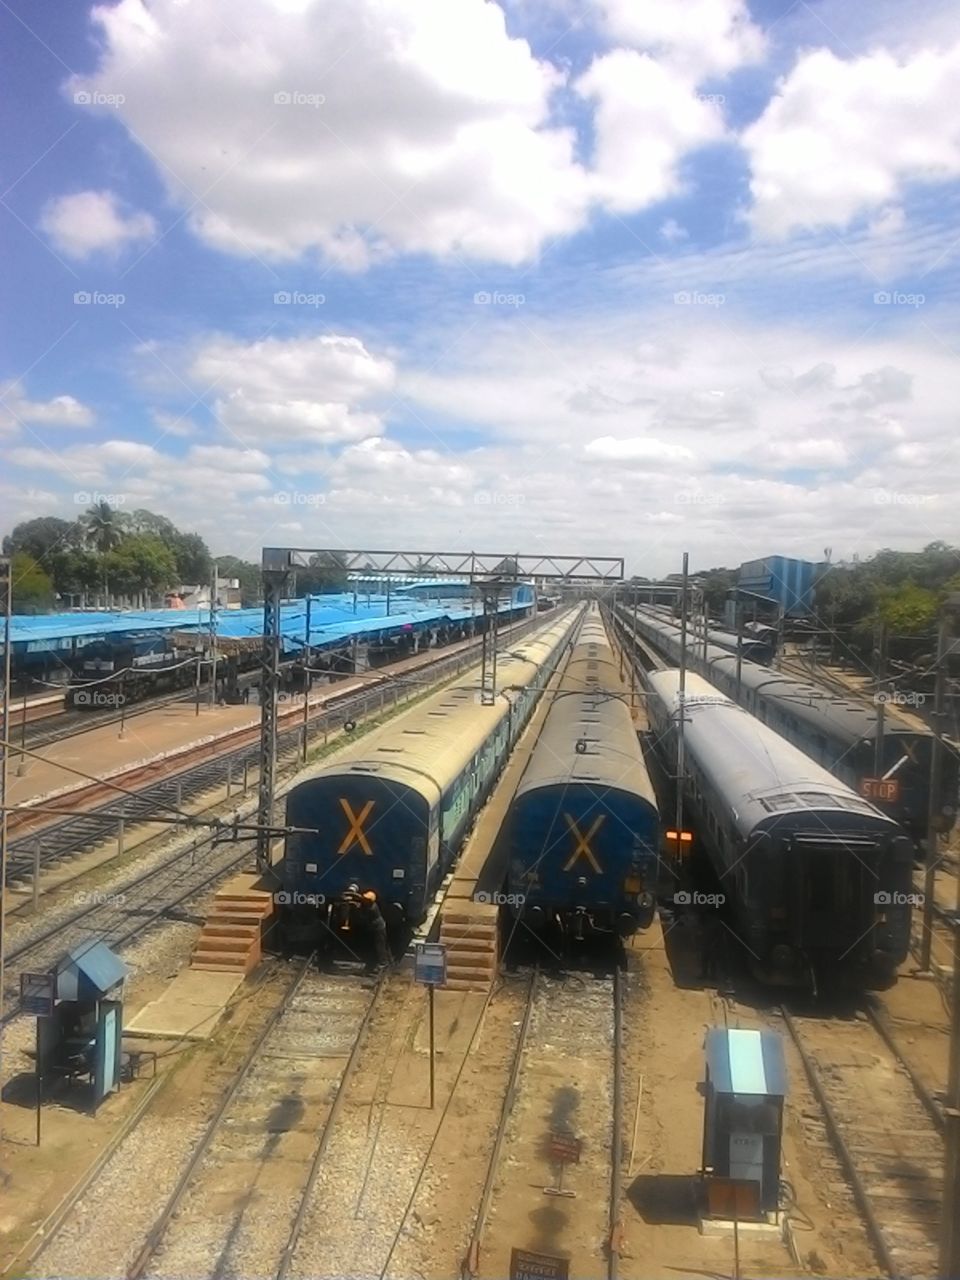 Trains in the yard